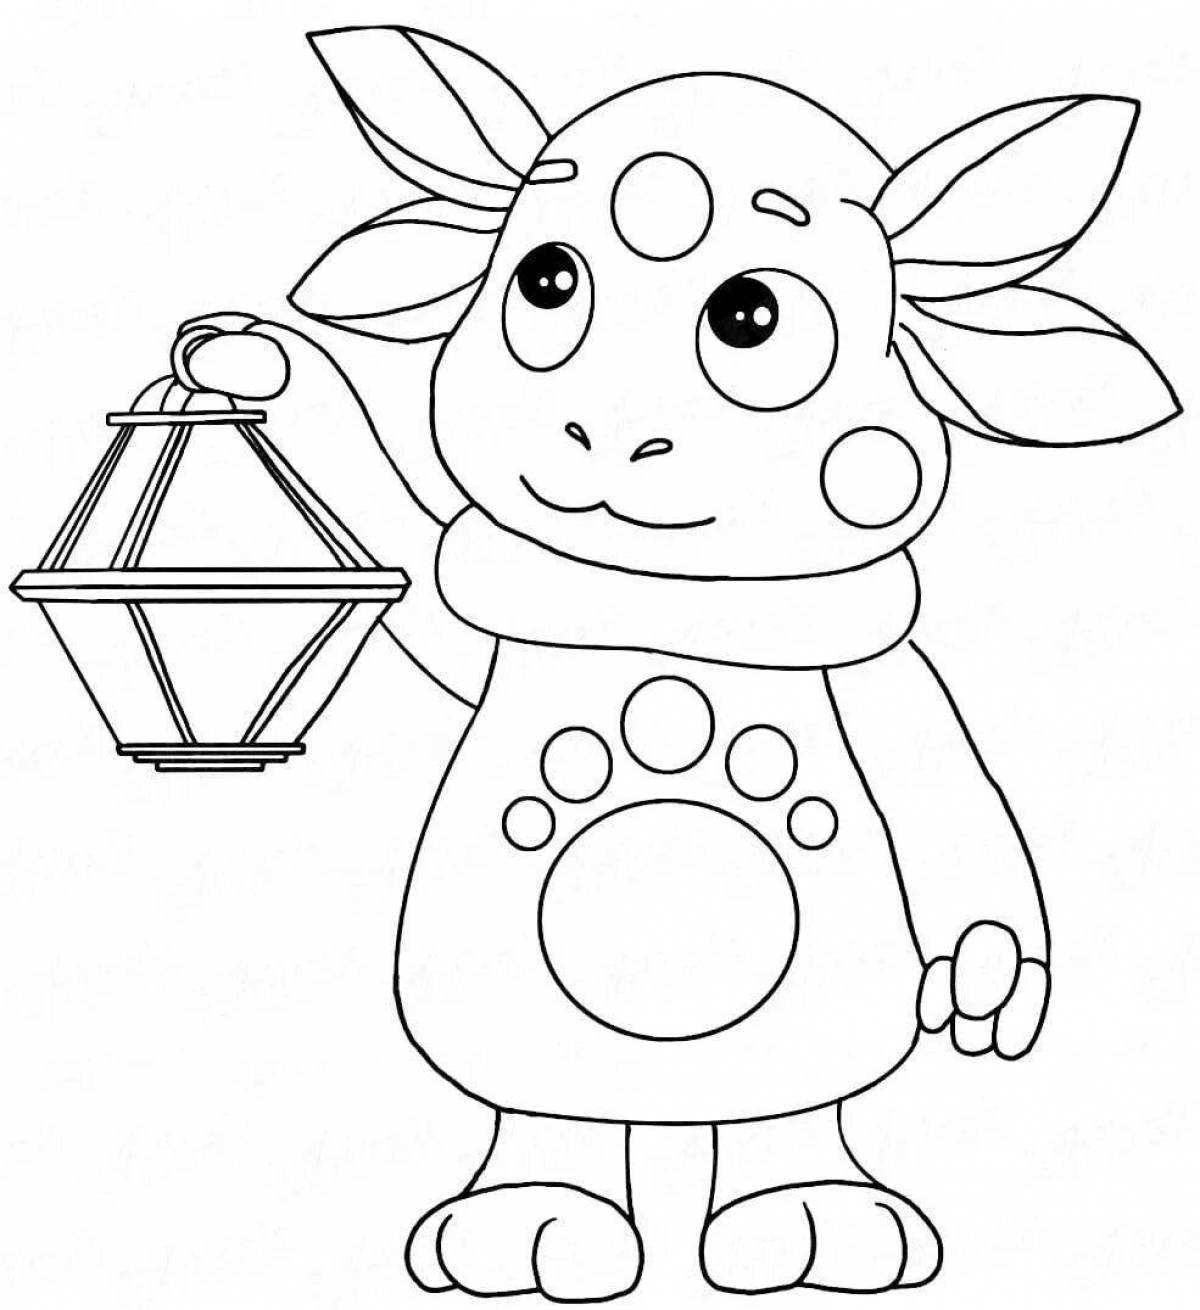 Gorgeous children's coloring download